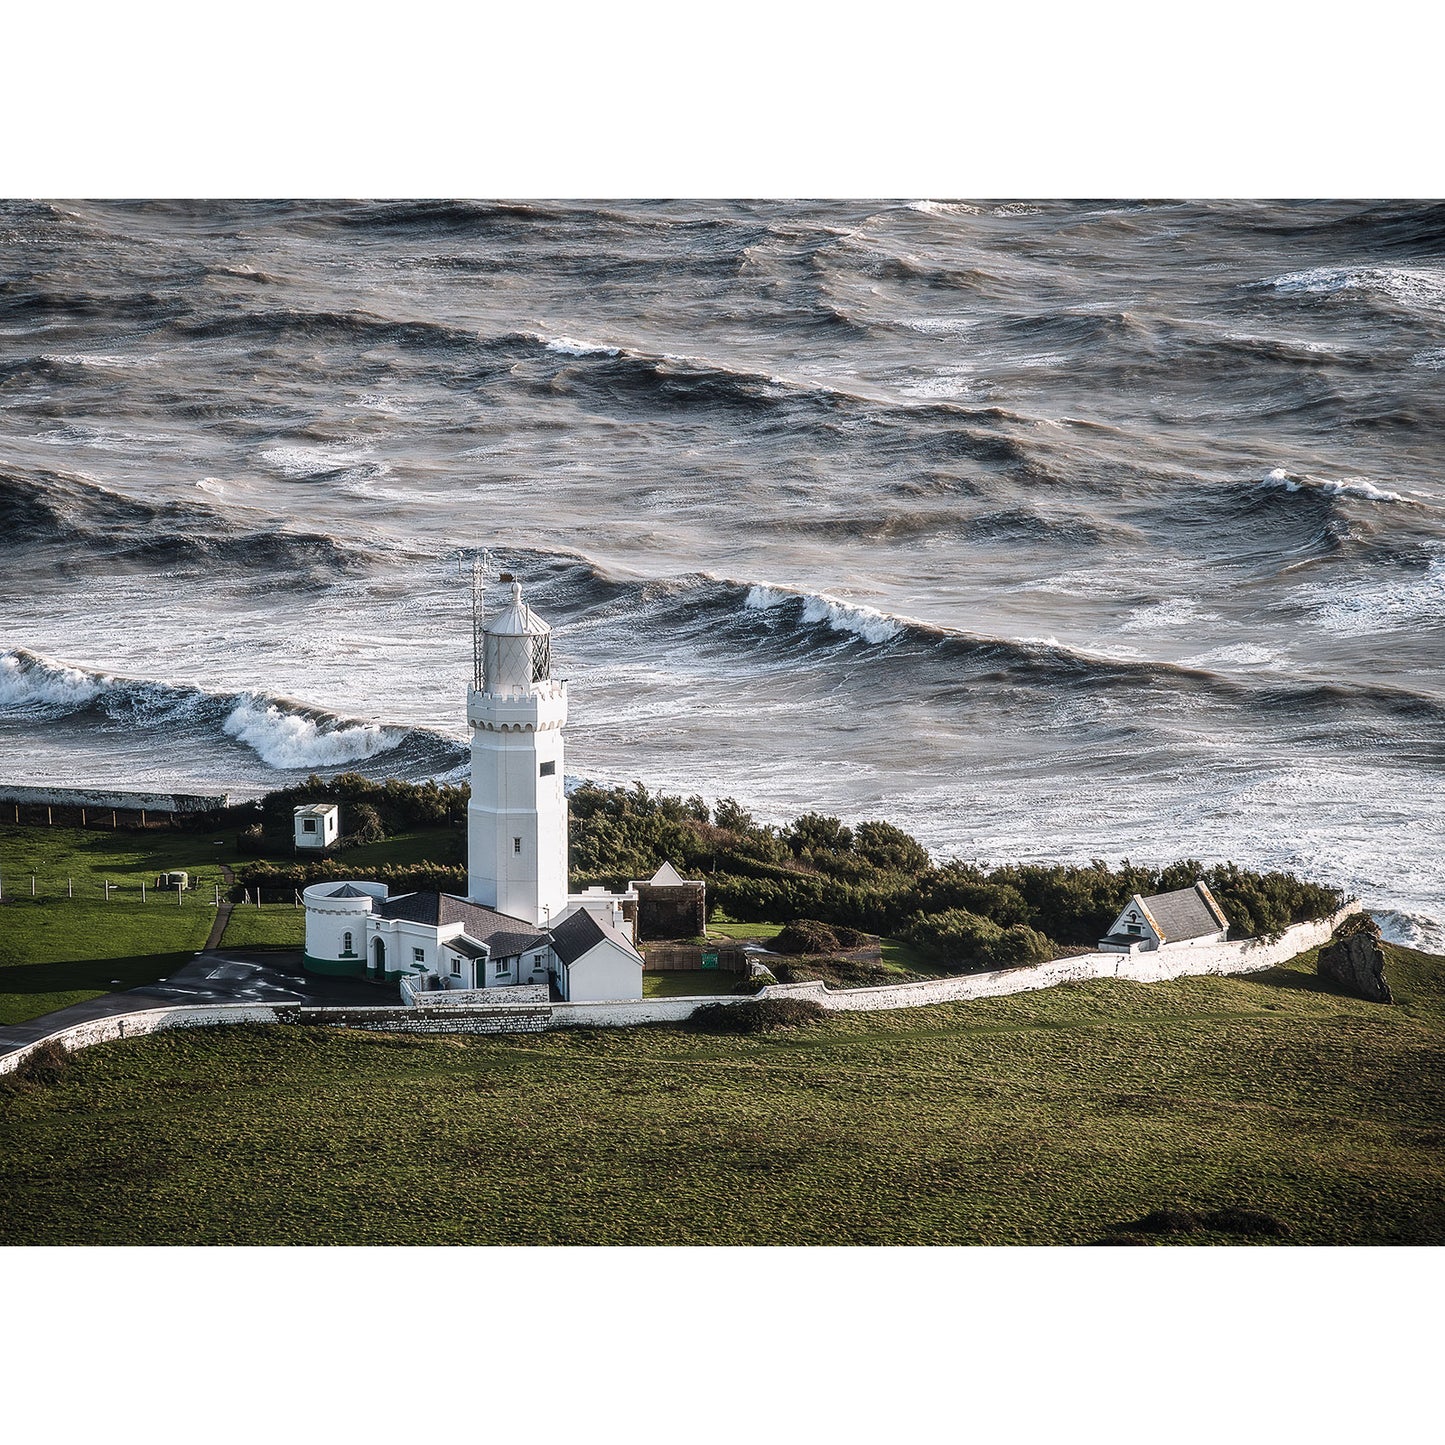 A Stormy Seas lighthouse stands on the Isle of Wight's coastal headland above turbulent sea waves, captured by Available Light Photography.